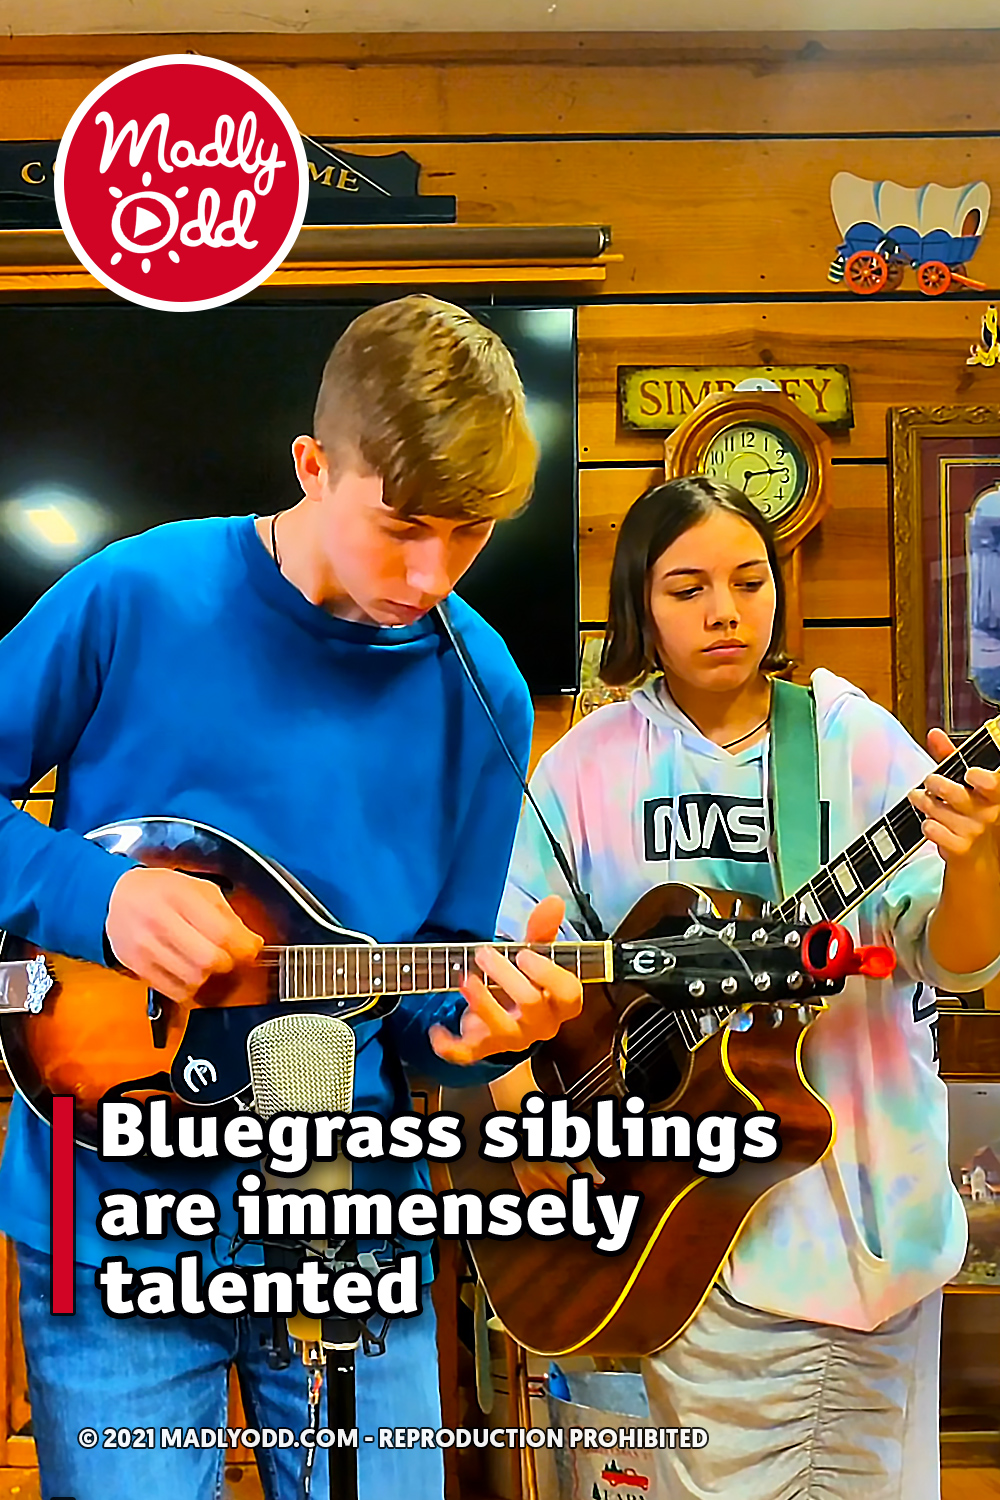 Bluegrass siblings are immensely talented